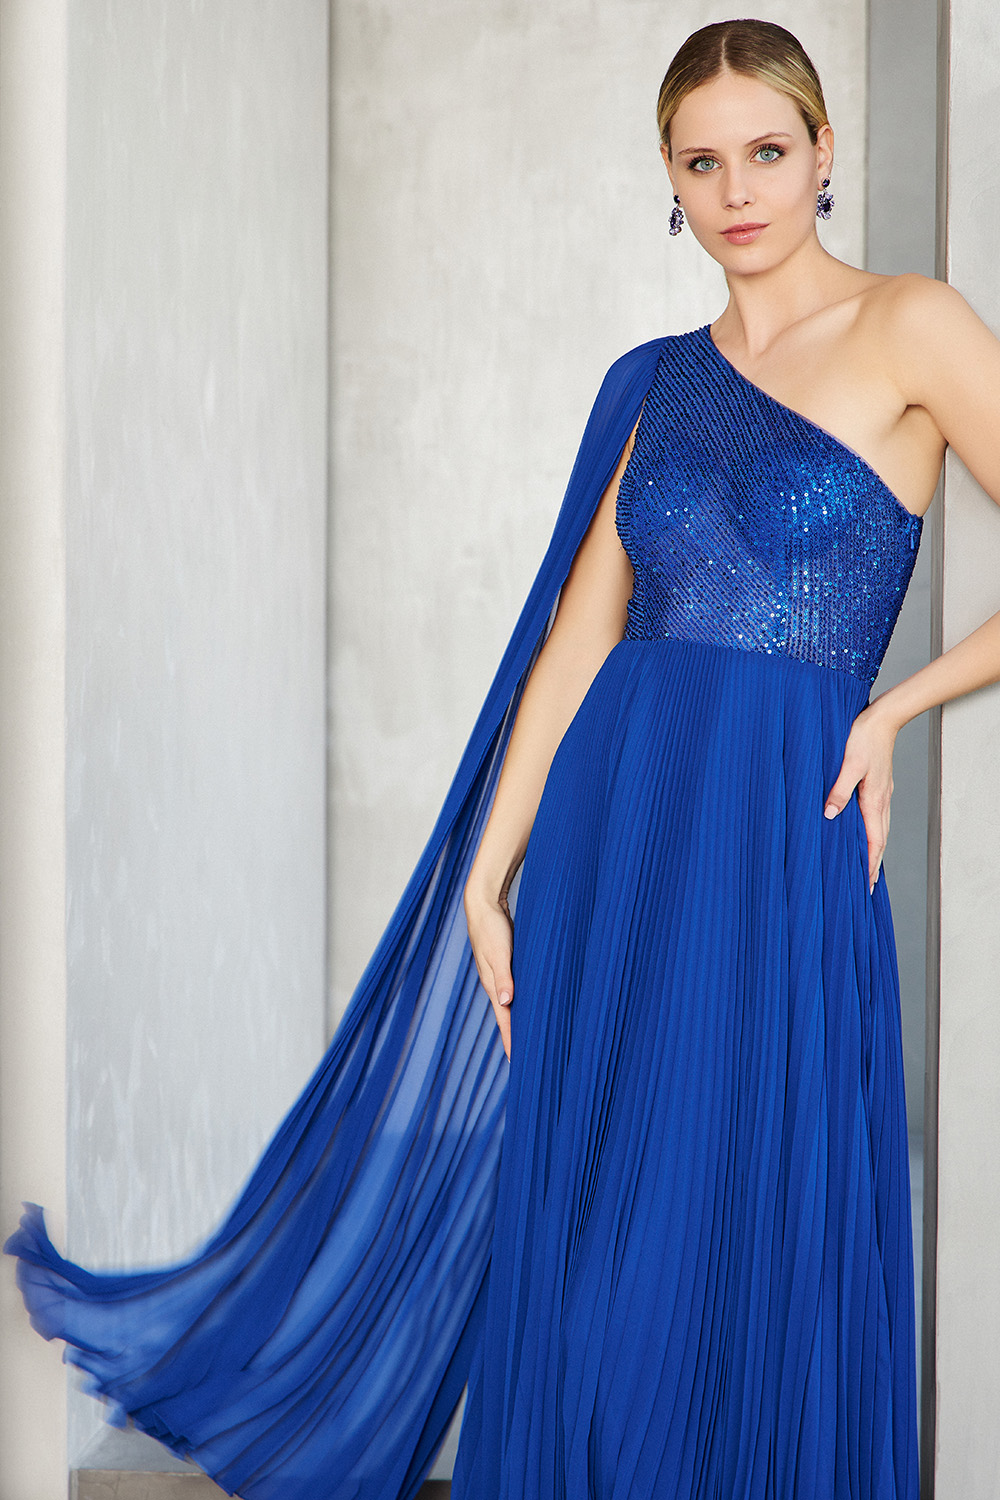 Evening Dresses / One shloulder long pleated dress, beaded top with sequences and pleated long sleeve